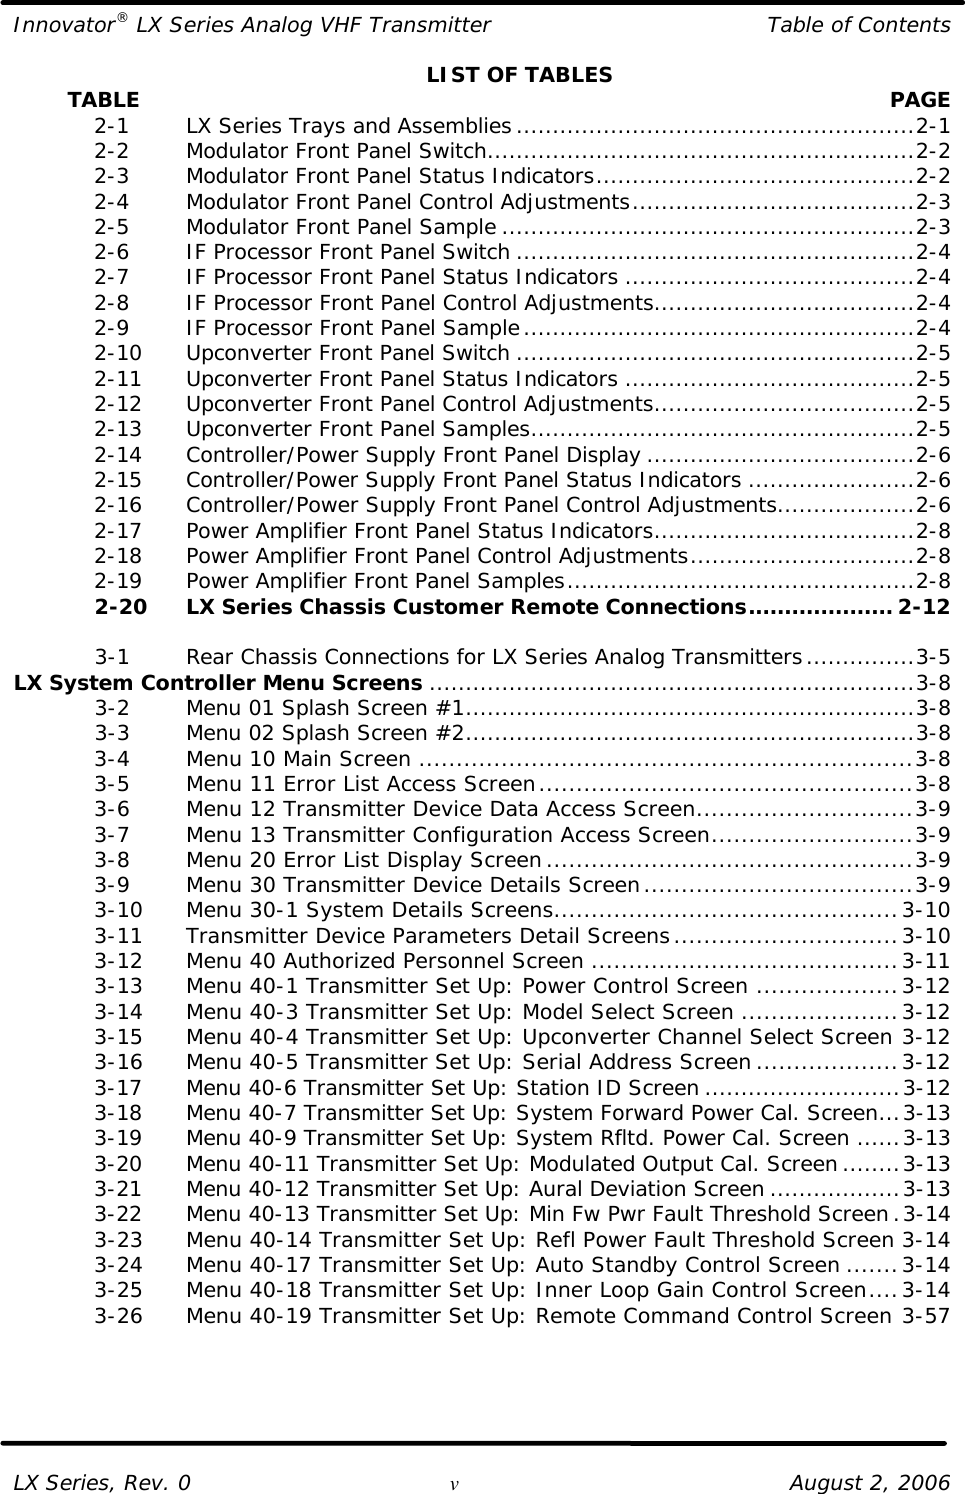 Innovator® LX Series Analog VHF Transmitter Table of Contents  LX Series, Rev. 0 v August 2, 2006 LIST OF TABLES         TABLE  PAGE  2-1   LX Series Trays and Assemblies.......................................................2-1  2-2   Modulator Front Panel Switch...........................................................2-2  2-3   Modulator Front Panel Status Indicators............................................2-2  2-4   Modulator Front Panel Control Adjustments.......................................2-3  2-5   Modulator Front Panel Sample .........................................................2-3  2-6   IF Processor Front Panel Switch .......................................................2-4  2-7   IF Processor Front Panel Status Indicators ........................................2-4  2-8   IF Processor Front Panel Control Adjustments....................................2-4  2-9   IF Processor Front Panel Sample......................................................2-4  2-10 Upconverter Front Panel Switch .......................................................2-5  2-11 Upconverter Front Panel Status Indicators ........................................2-5  2-12 Upconverter Front Panel Control Adjustments....................................2-5  2-13 Upconverter Front Panel Samples.....................................................2-5  2-14 Controller/Power Supply Front Panel Display .....................................2-6  2-15 Controller/Power Supply Front Panel Status Indicators .......................2-6  2-16 Controller/Power Supply Front Panel Control Adjustments...................2-6  2-17 Power Amplifier Front Panel Status Indicators....................................2-8  2-18 Power Amplifier Front Panel Control Adjustments...............................2-8  2-19 Power Amplifier Front Panel Samples................................................2-8  2-20 LX Series Chassis Customer Remote Connections.................... 2-12   3-1   Rear Chassis Connections for LX Series Analog Transmitters...............3-5 LX System Controller Menu Screens ...................................................................3-8  3-2   Menu 01 Splash Screen #1..............................................................3-8  3-3   Menu 02 Splash Screen #2..............................................................3-8  3-4   Menu 10 Main Screen ..................................................................3-8  3-5   Menu 11 Error List Access Screen..................................................3-8  3-6   Menu 12 Transmitter Device Data Access Screen.............................3-9  3-7   Menu 13 Transmitter Configuration Access Screen...........................3-9  3-8   Menu 20 Error List Display Screen.................................................3-9  3-9   Menu 30 Transmitter Device Details Screen....................................3-9  3-10 Menu 30-1 System Details Screens..............................................3-10  3-11 Transmitter Device Parameters Detail Screens..............................3-10  3-12 Menu 40 Authorized Personnel Screen .........................................3-11  3-13 Menu 40-1 Transmitter Set Up: Power Control Screen ...................3-12  3-14 Menu 40-3 Transmitter Set Up: Model Select Screen .....................3-12  3-15 Menu 40-4 Transmitter Set Up: Upconverter Channel Select Screen 3-12  3-16 Menu 40-5 Transmitter Set Up: Serial Address Screen ...................3-12  3-17 Menu 40-6 Transmitter Set Up: Station ID Screen ...........................3-12  3-18 Menu 40-7 Transmitter Set Up: System Forward Power Cal. Screen...3-13  3-19 Menu 40-9 Transmitter Set Up: System Rfltd. Power Cal. Screen ......3-13  3-20 Menu 40-11 Transmitter Set Up: Modulated Output Cal. Screen ........3-13  3-21 Menu 40-12 Transmitter Set Up: Aural Deviation Screen ..................3-13  3-22 Menu 40-13 Transmitter Set Up: Min Fw Pwr Fault Threshold Screen.3-14  3-23 Menu 40-14 Transmitter Set Up: Refl Power Fault Threshold Screen 3-14  3-24 Menu 40-17 Transmitter Set Up: Auto Standby Control Screen .......3-14  3-25 Menu 40-18 Transmitter Set Up: Inner Loop Gain Control Screen....3-14  3-26 Menu 40-19 Transmitter Set Up: Remote Command Control Screen 3-57  